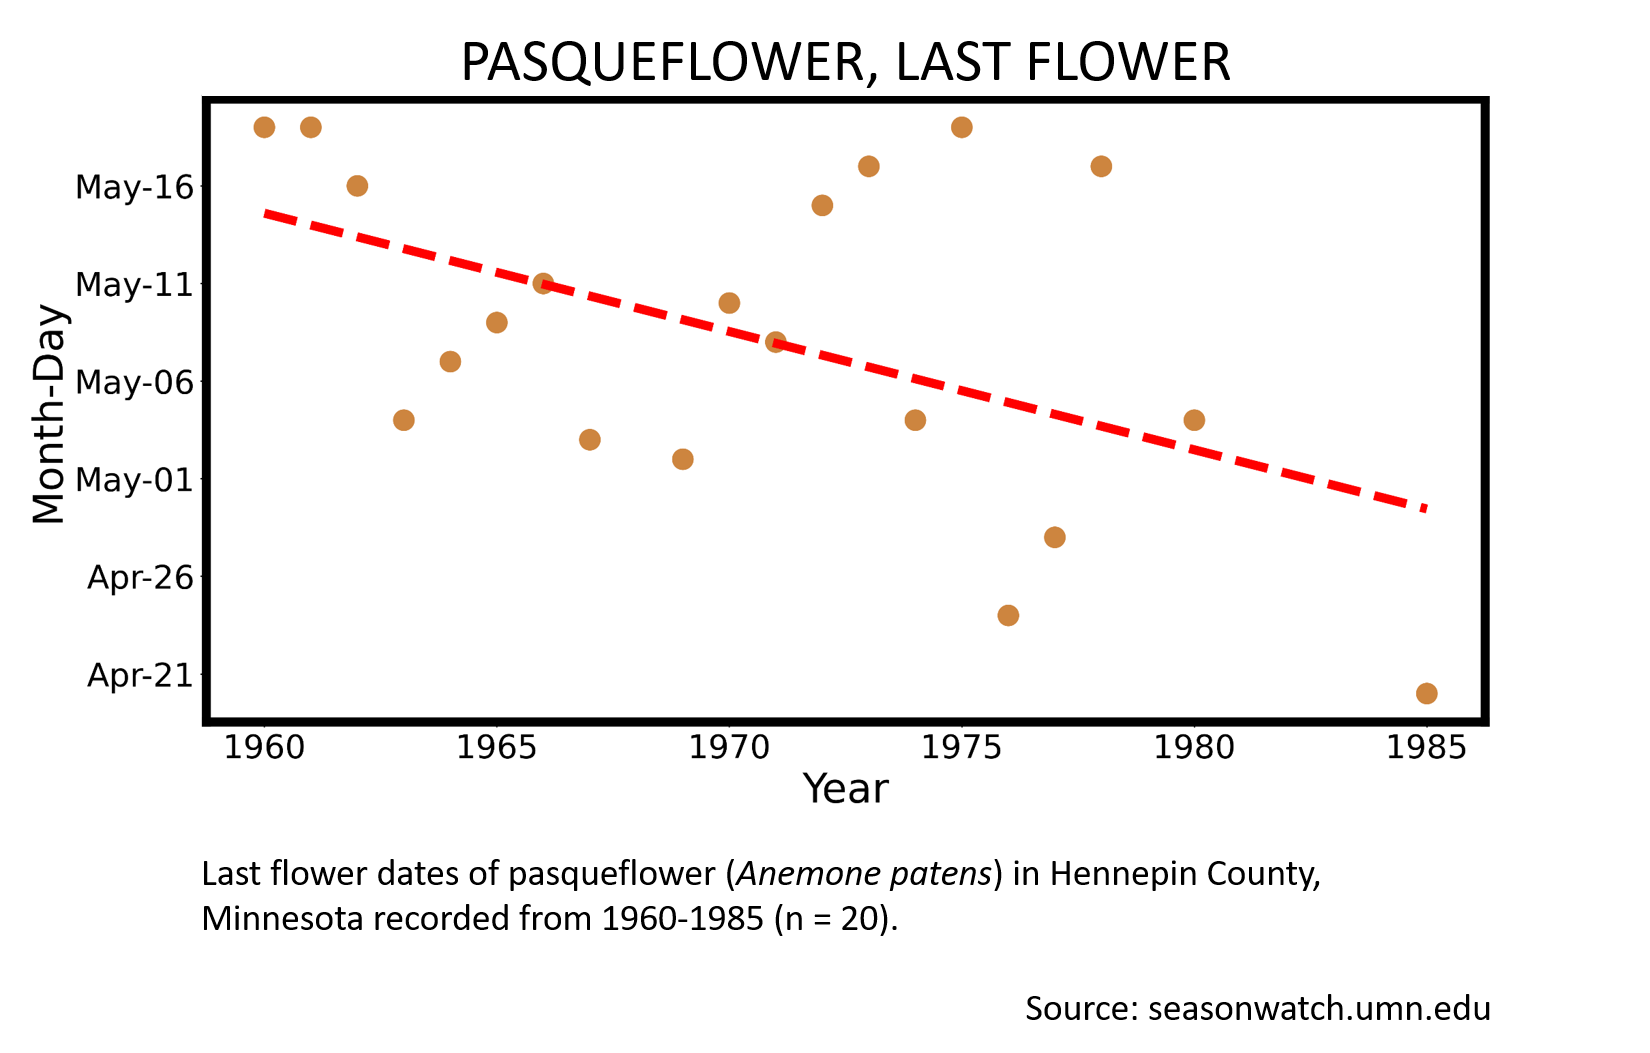 Scatterplot showing pasqueflower phenology observations in Hennepin County, Minnesota